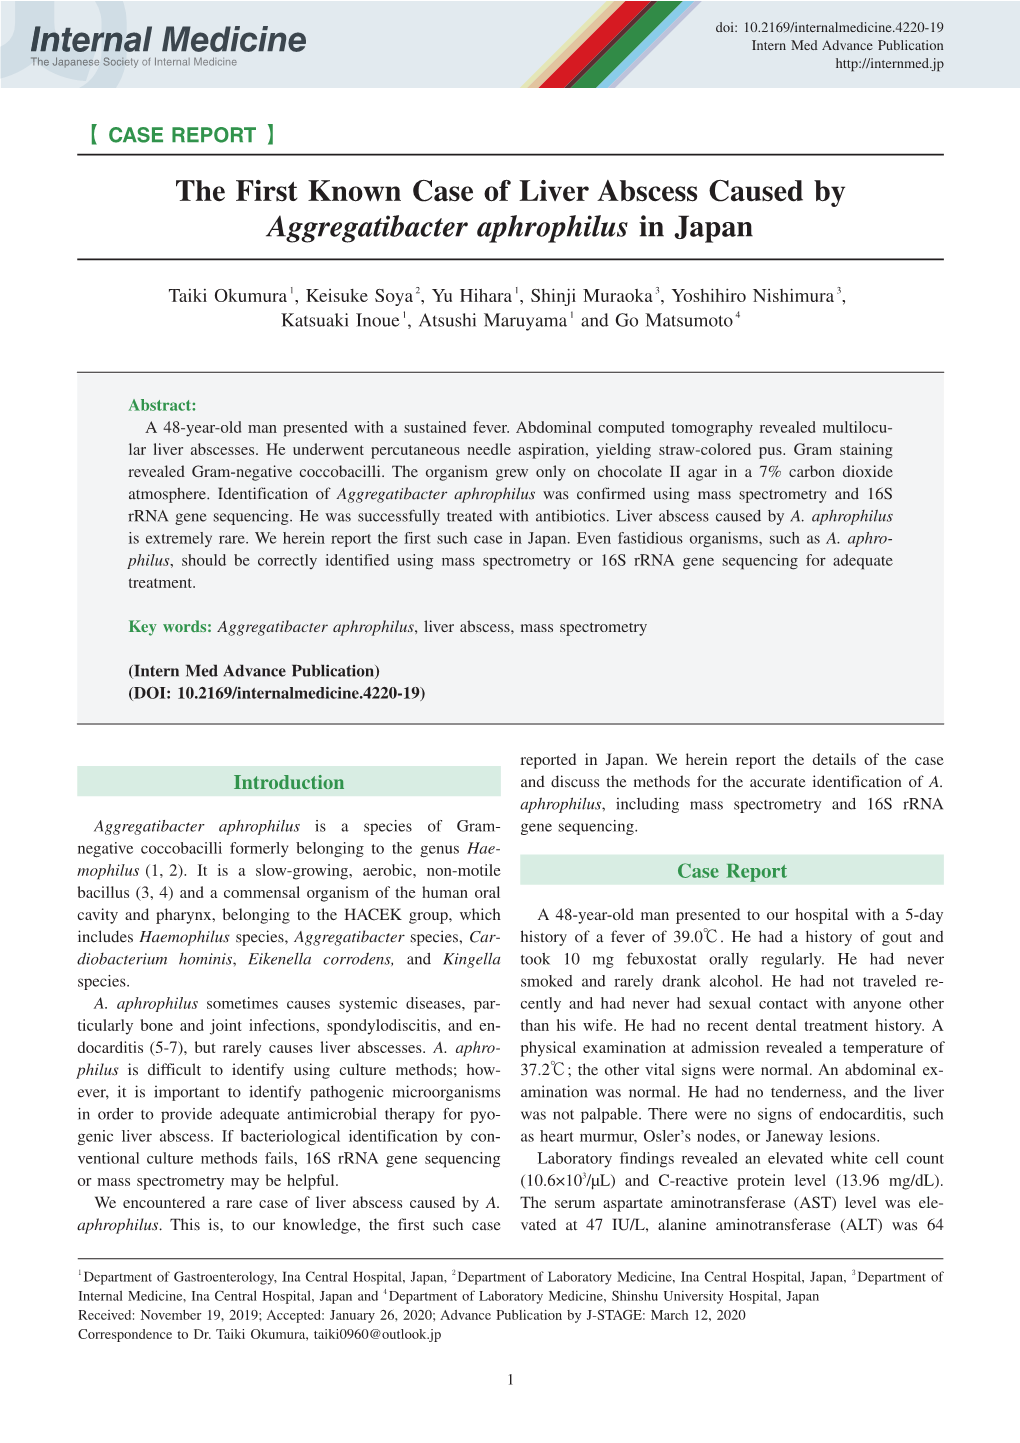 The First Known Case of Liver Abscess Caused by Aggregatibacter Aphrophilus in Japan